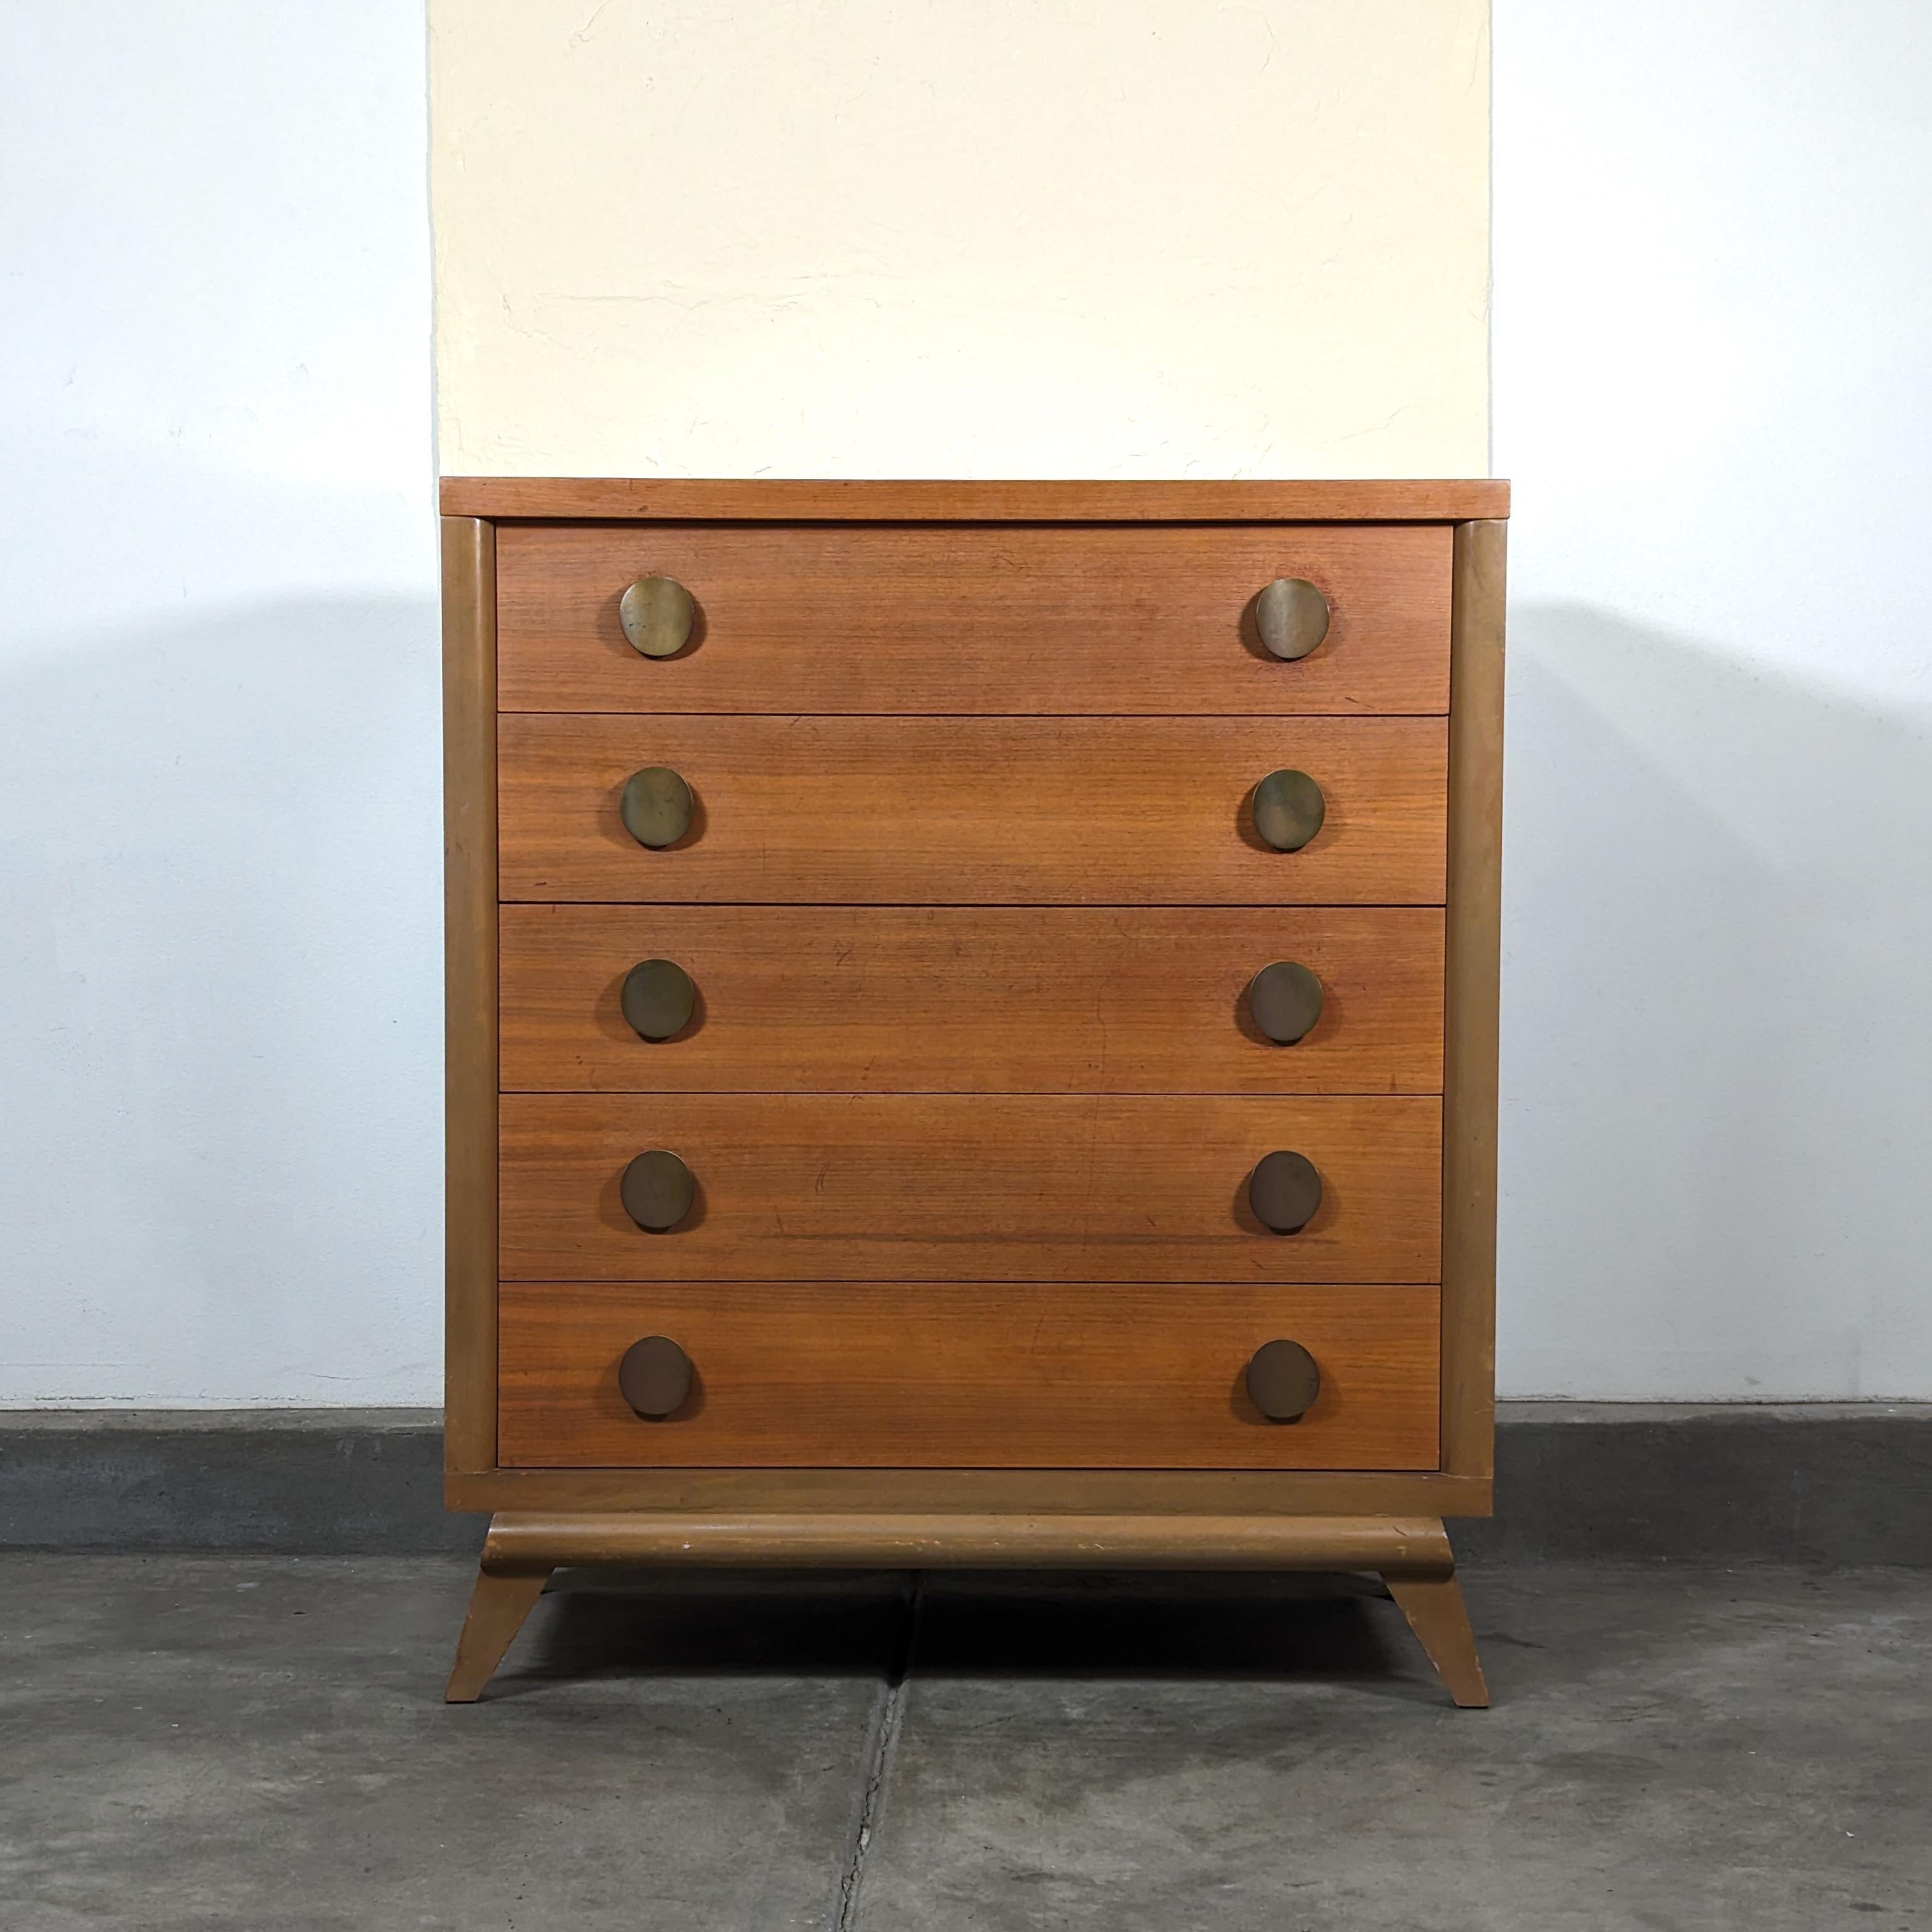 Step back in time and infuse your home with a piece of history through this exquisite vintage mid-century modern tallboy dresser, reminiscent of the iconic Harmony House Furniture of the 1950s. Crafted with an eye for design and functionality, this